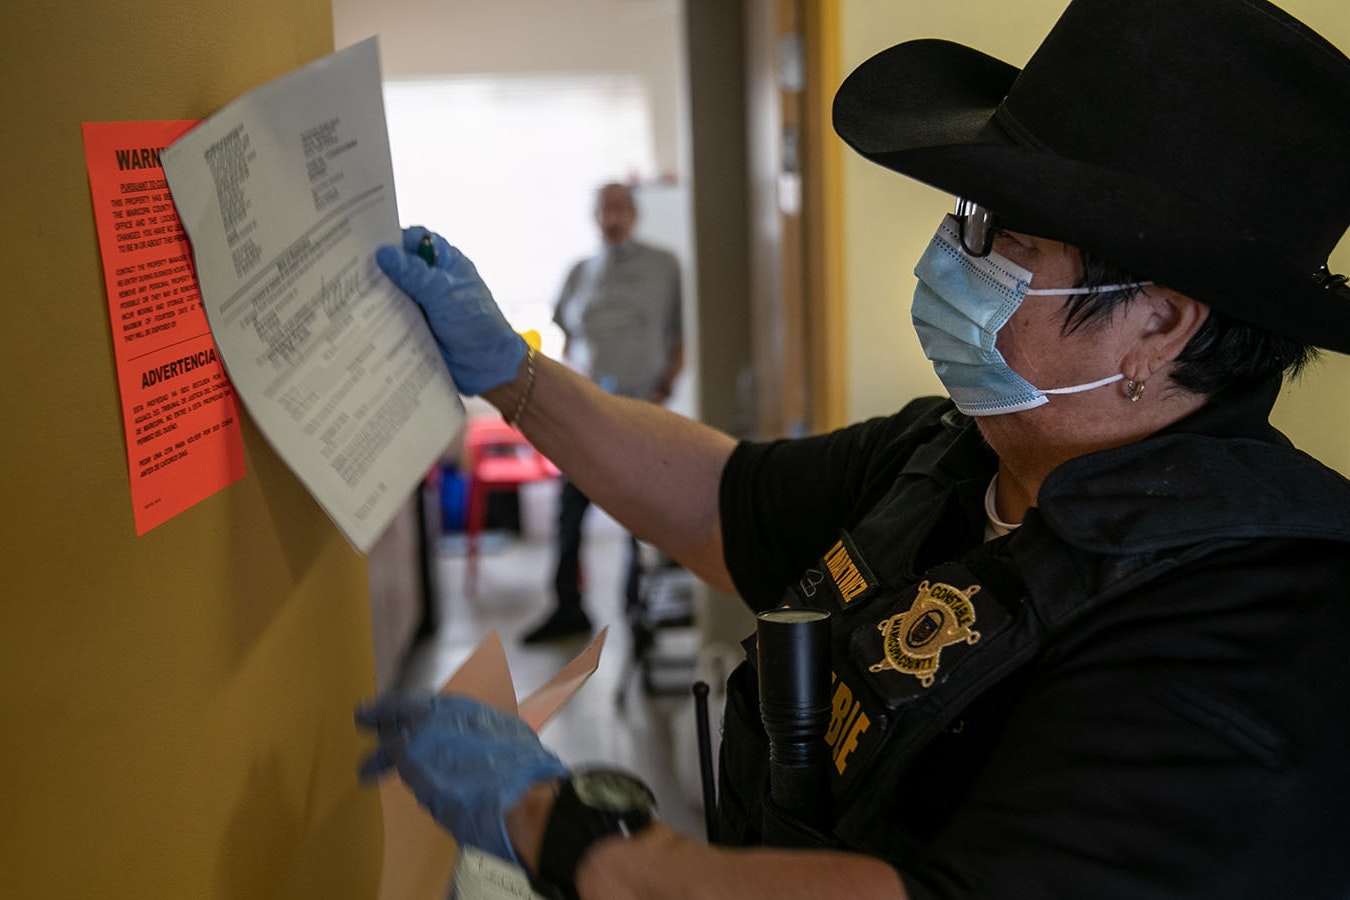 File photo: Officer posts eviction notice